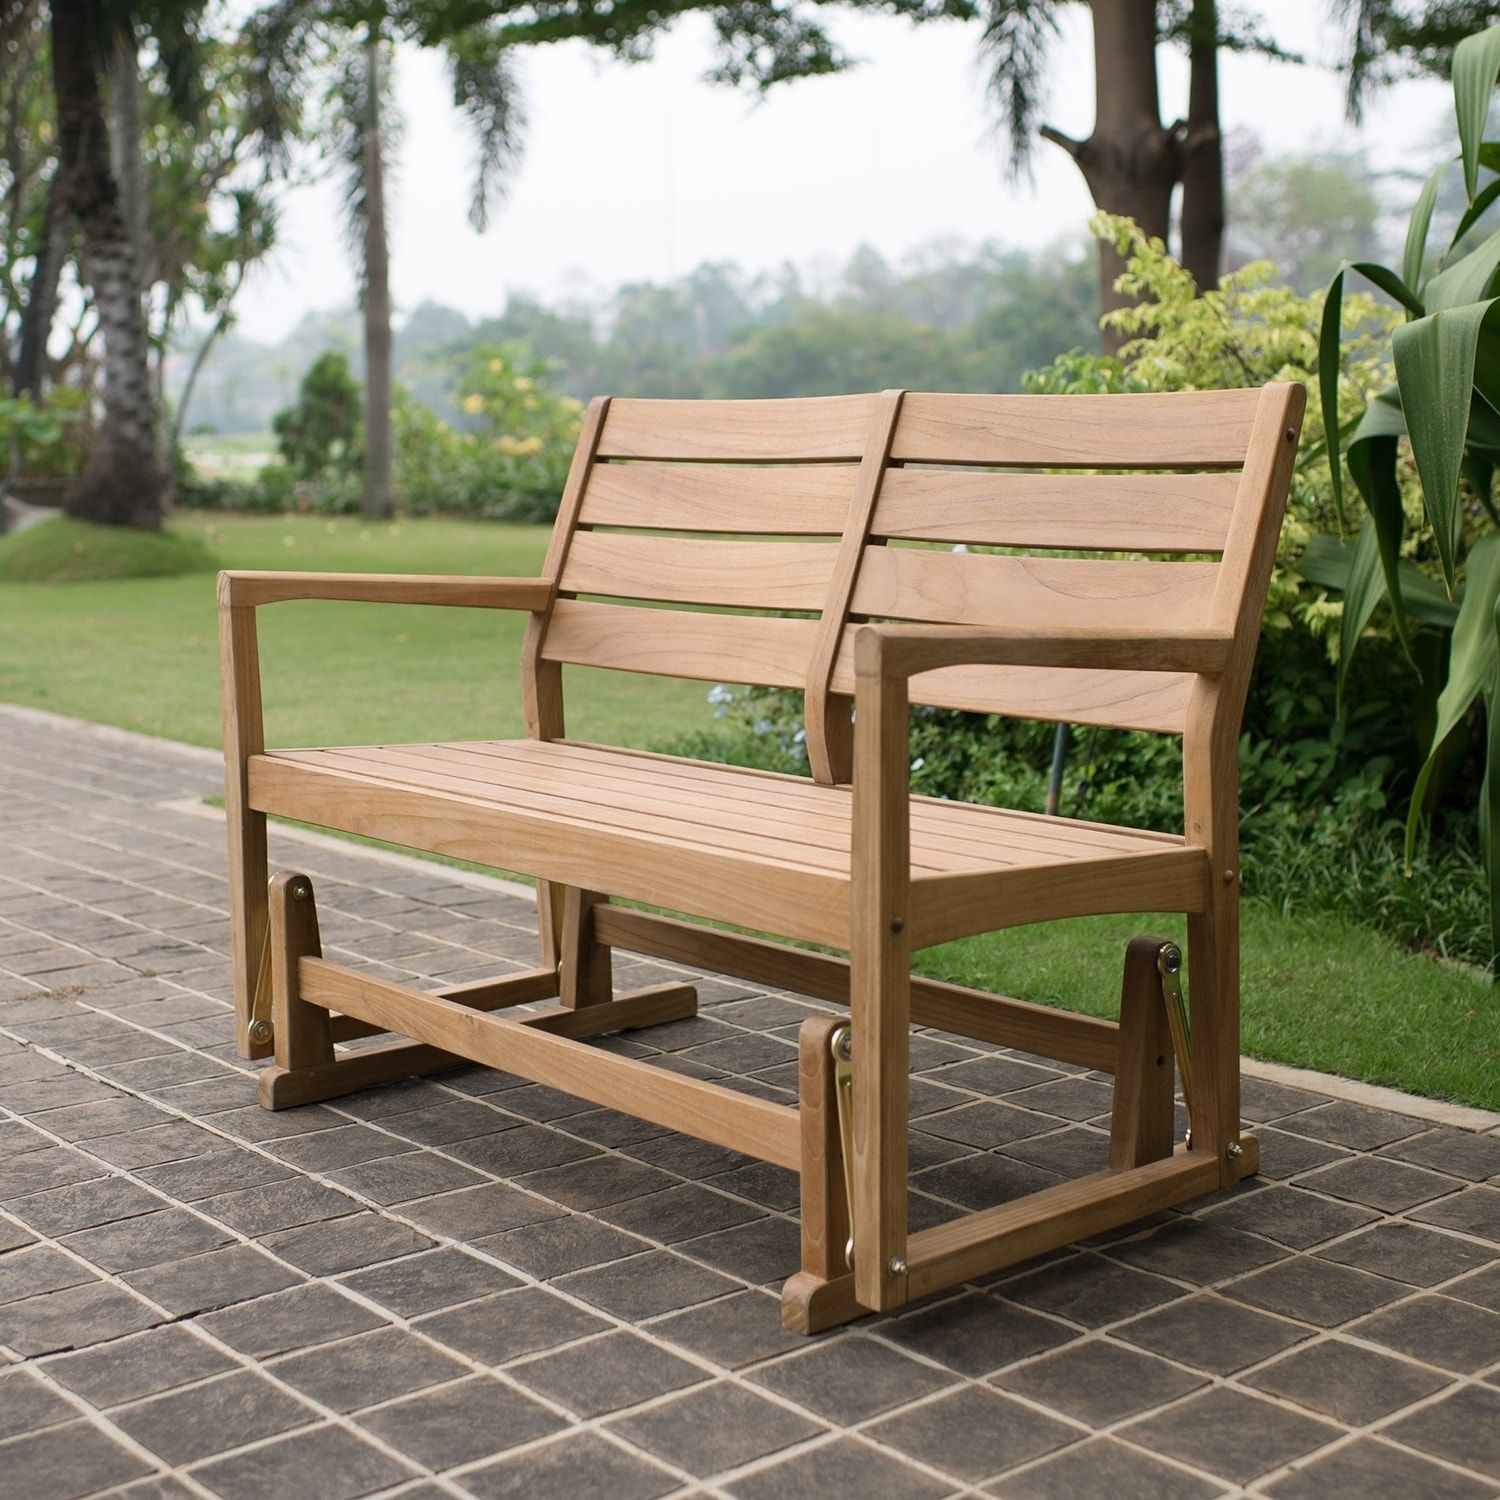 Cambridge Casual Andrea Teak Glider Bench – Walmart Within Teak Glider Benches (View 19 of 25)